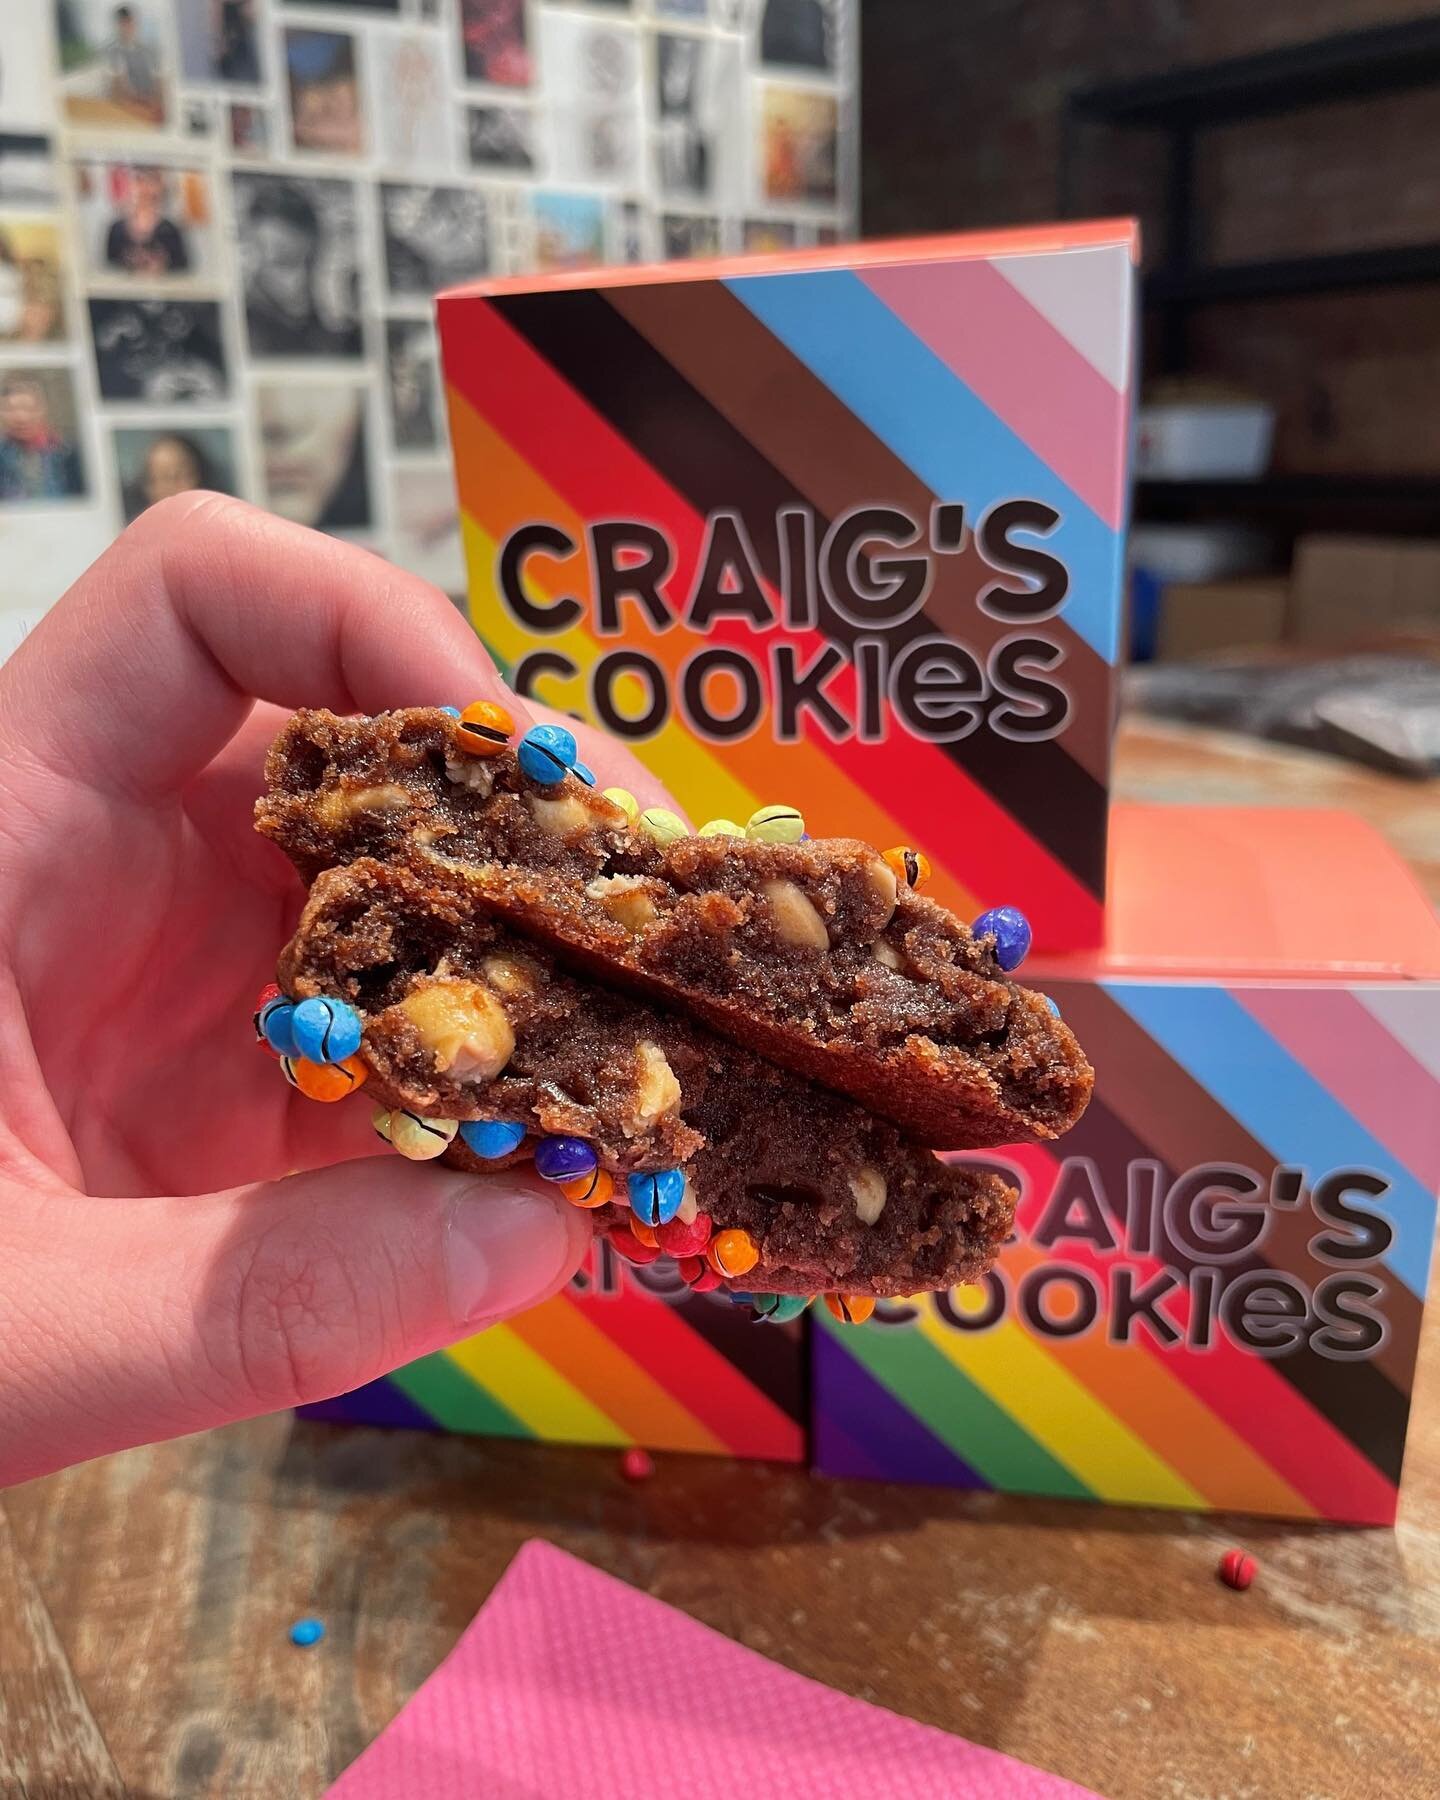 Pride Month was an incredible month where we had the opportunity to put an amazing LGBTQ+ business leader in the spotlight! Craig Pike of Craig&rsquo;s Cookies received well-deserved attention for his mouth-watering cookies and his business philosoph